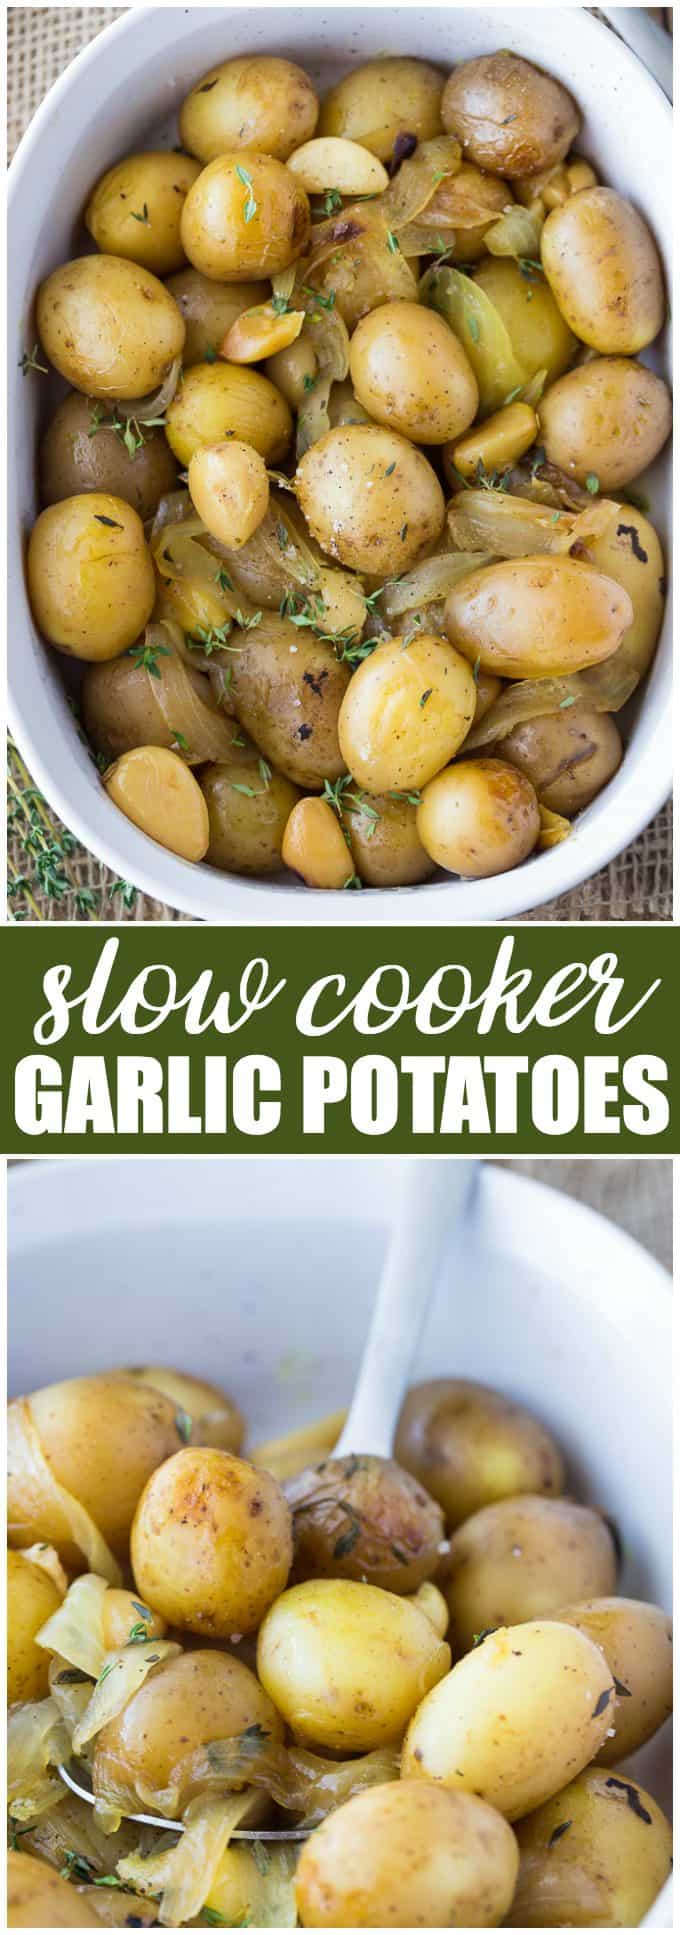 Slow Cooker Garlic Potatoes - Perfectly roasted, tender and full of delicious garlic flavour. Don't worry, the garlic isn't overpowering and provides the perfect hint to each bite!